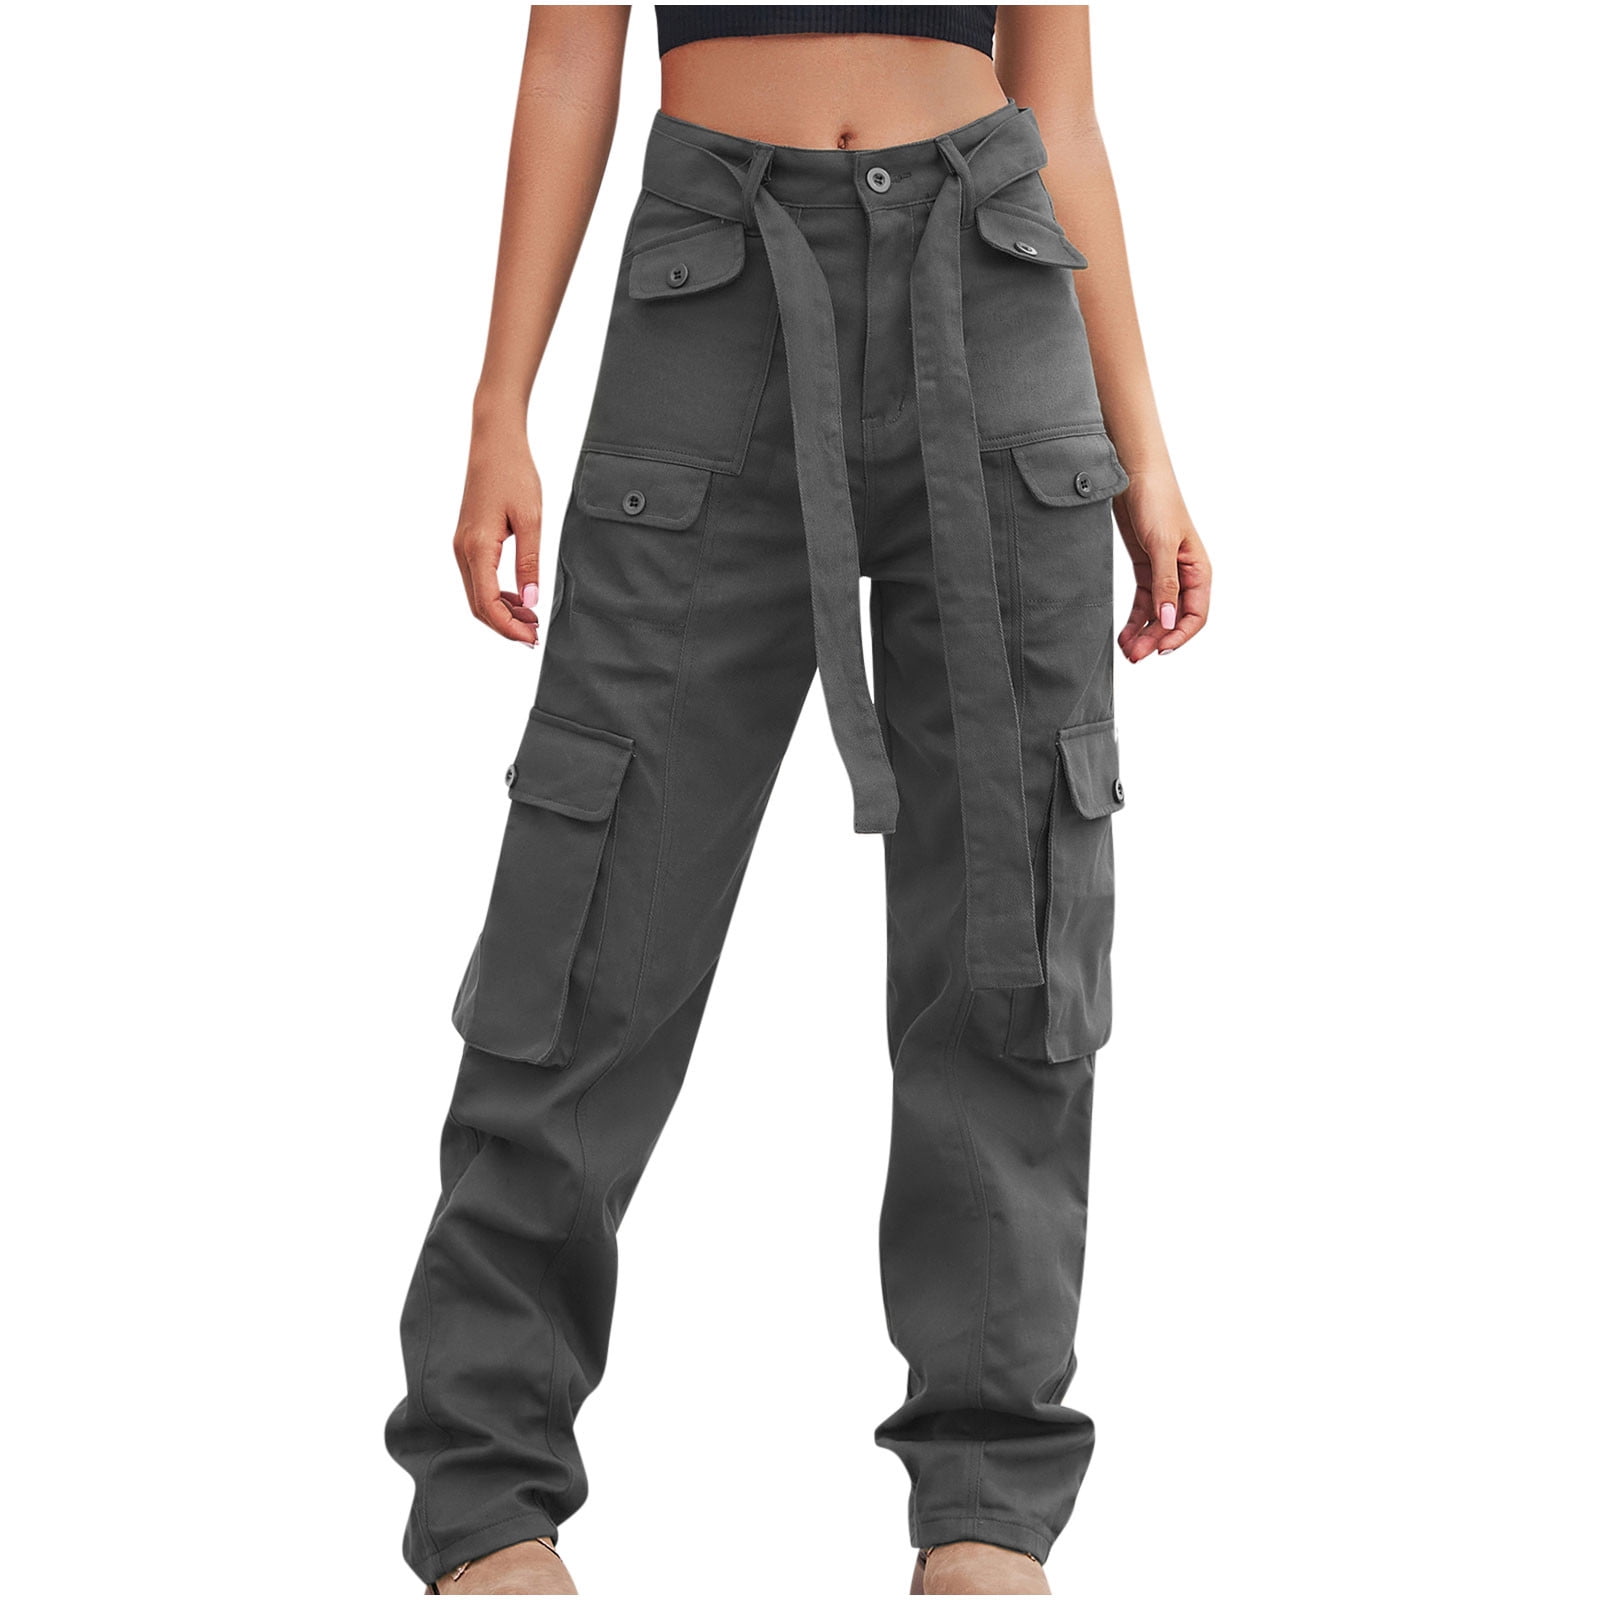 YWDJ Womens Black Cargo Pants With Pockets Denim Casual Long Pant